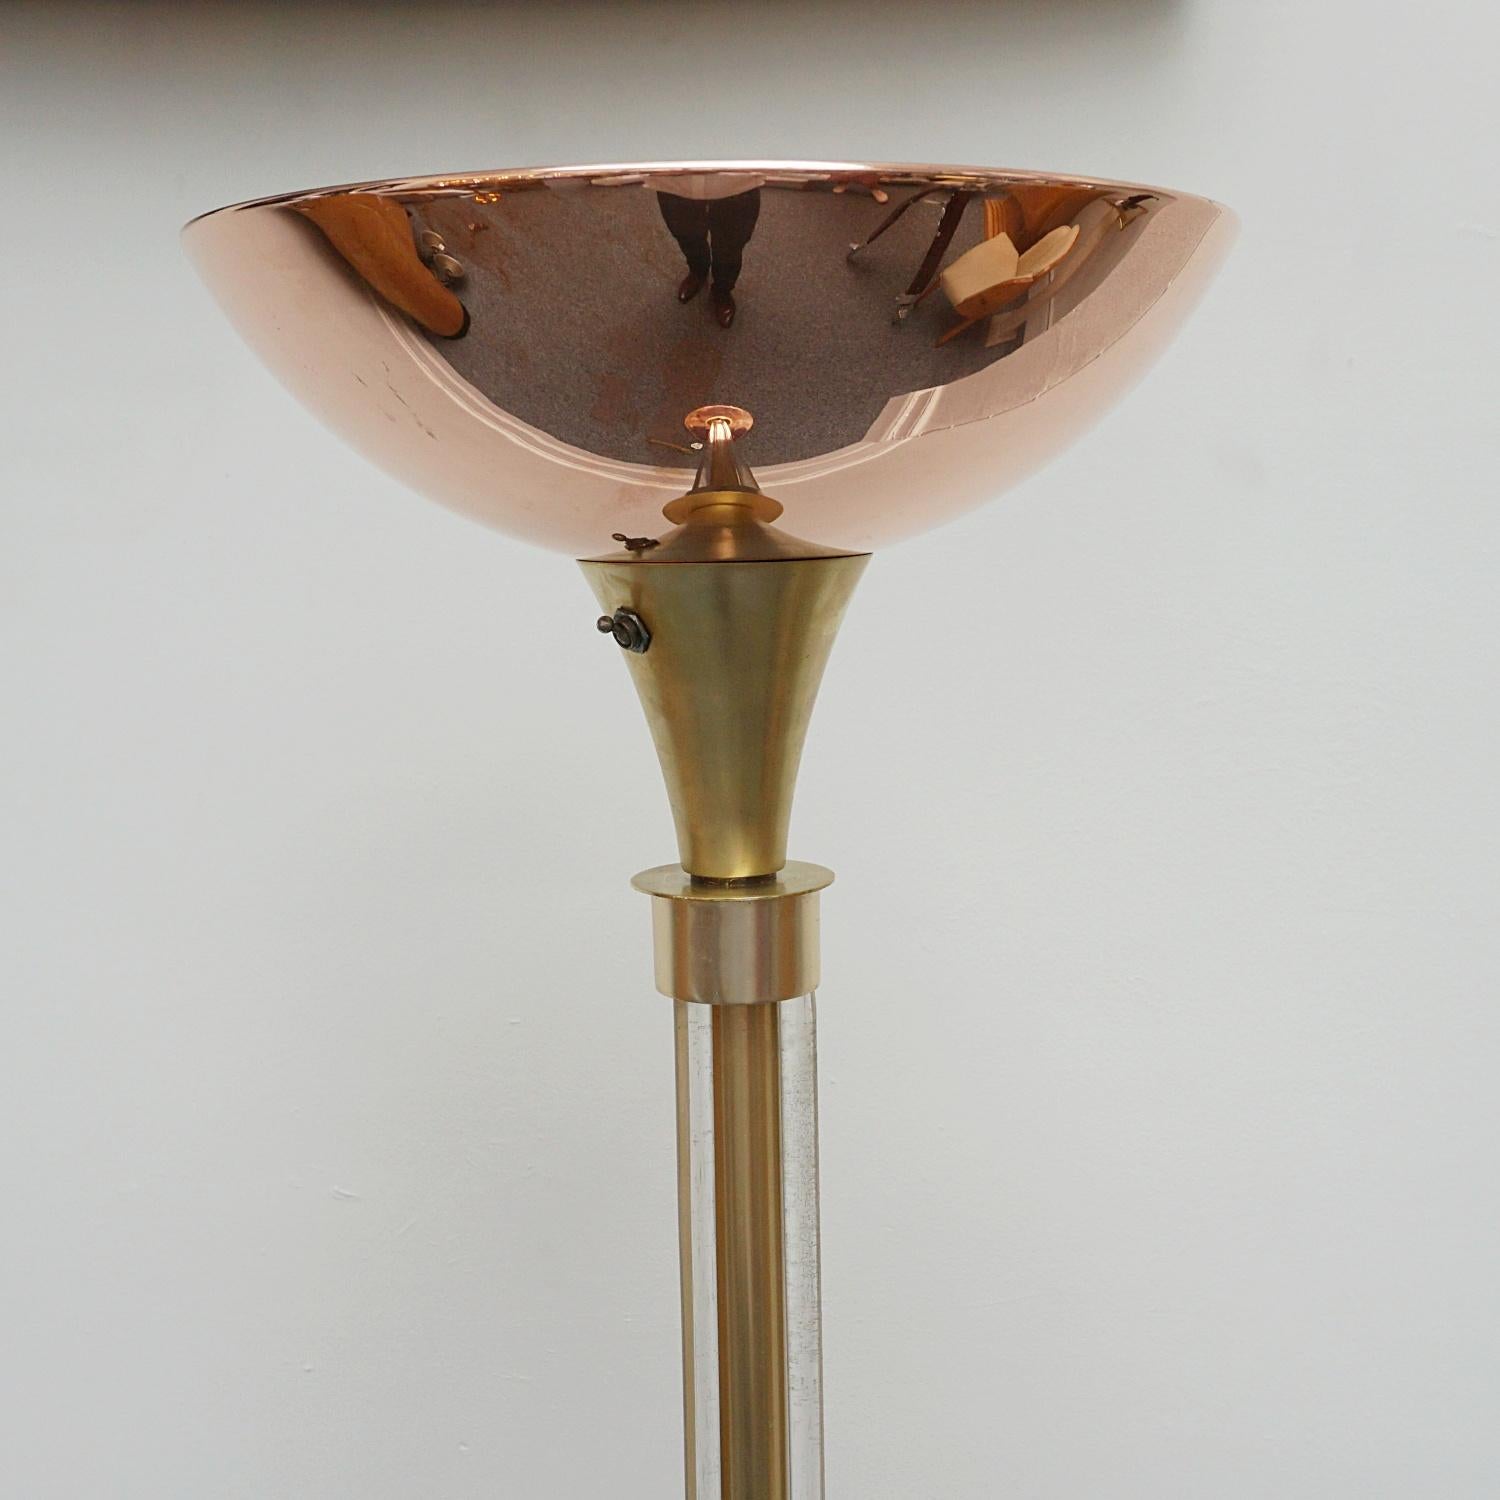 Art Deco Brass Copper and Glass Uplighter Floor Lamp For Sale 2